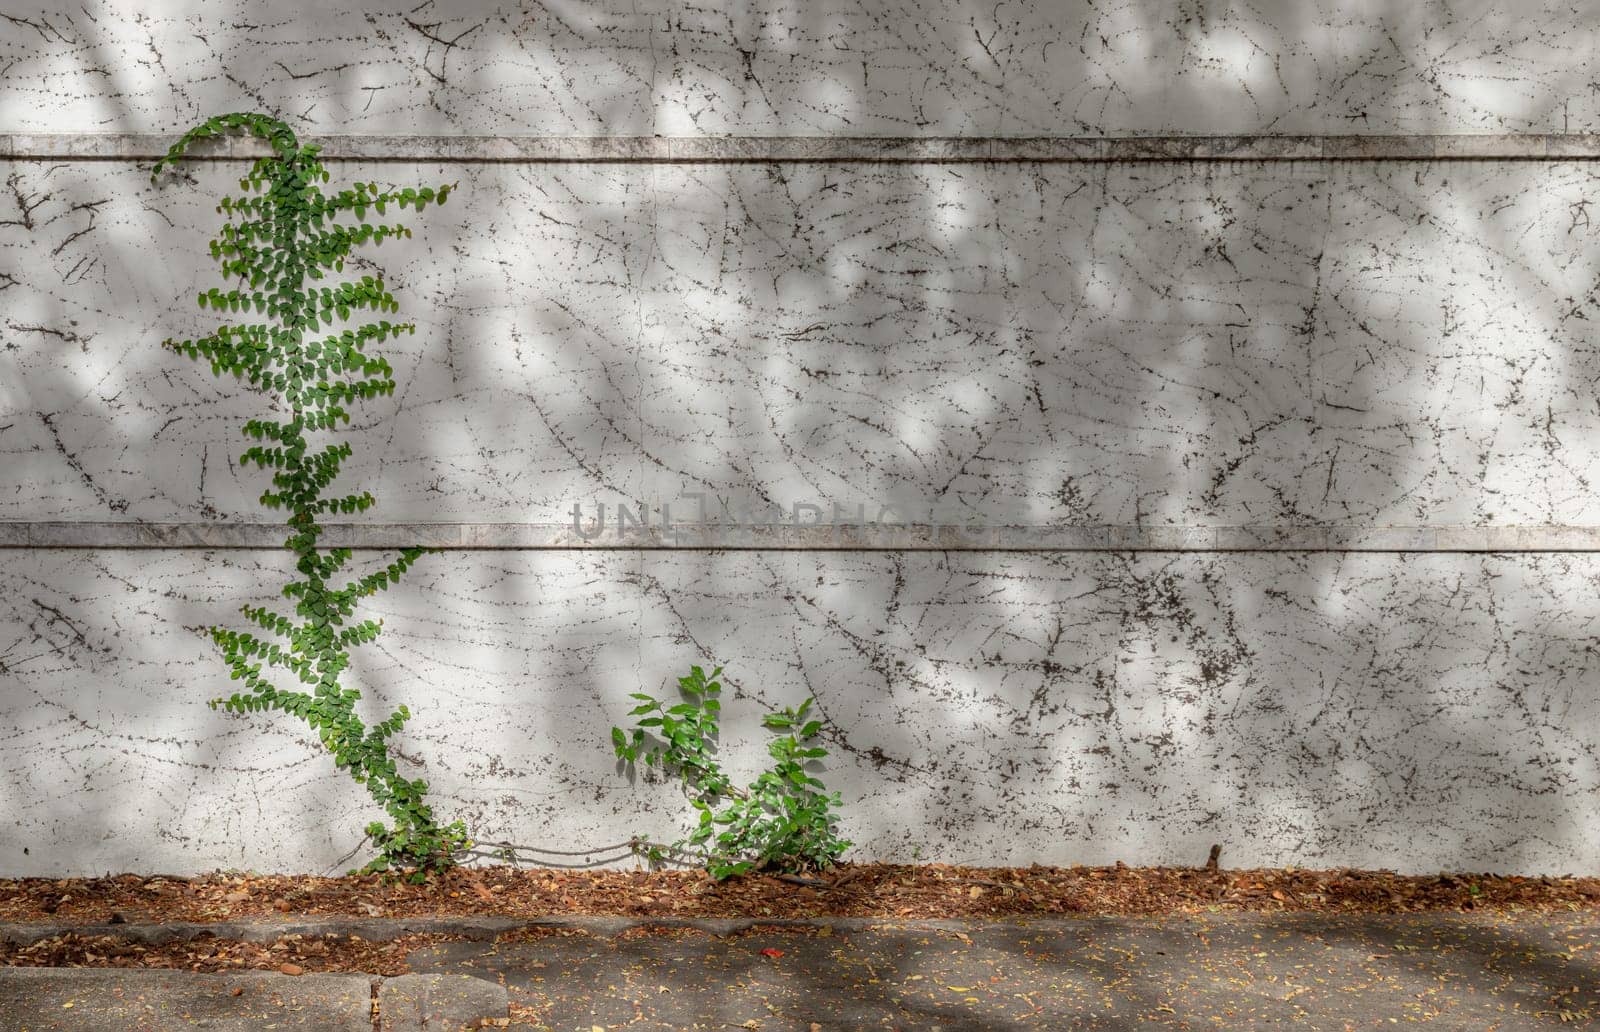 Climbing fig or Creeping fig (Ficus Pumila) the ivy plants are creeping up on whitewashed cement surface background. by tosirikul